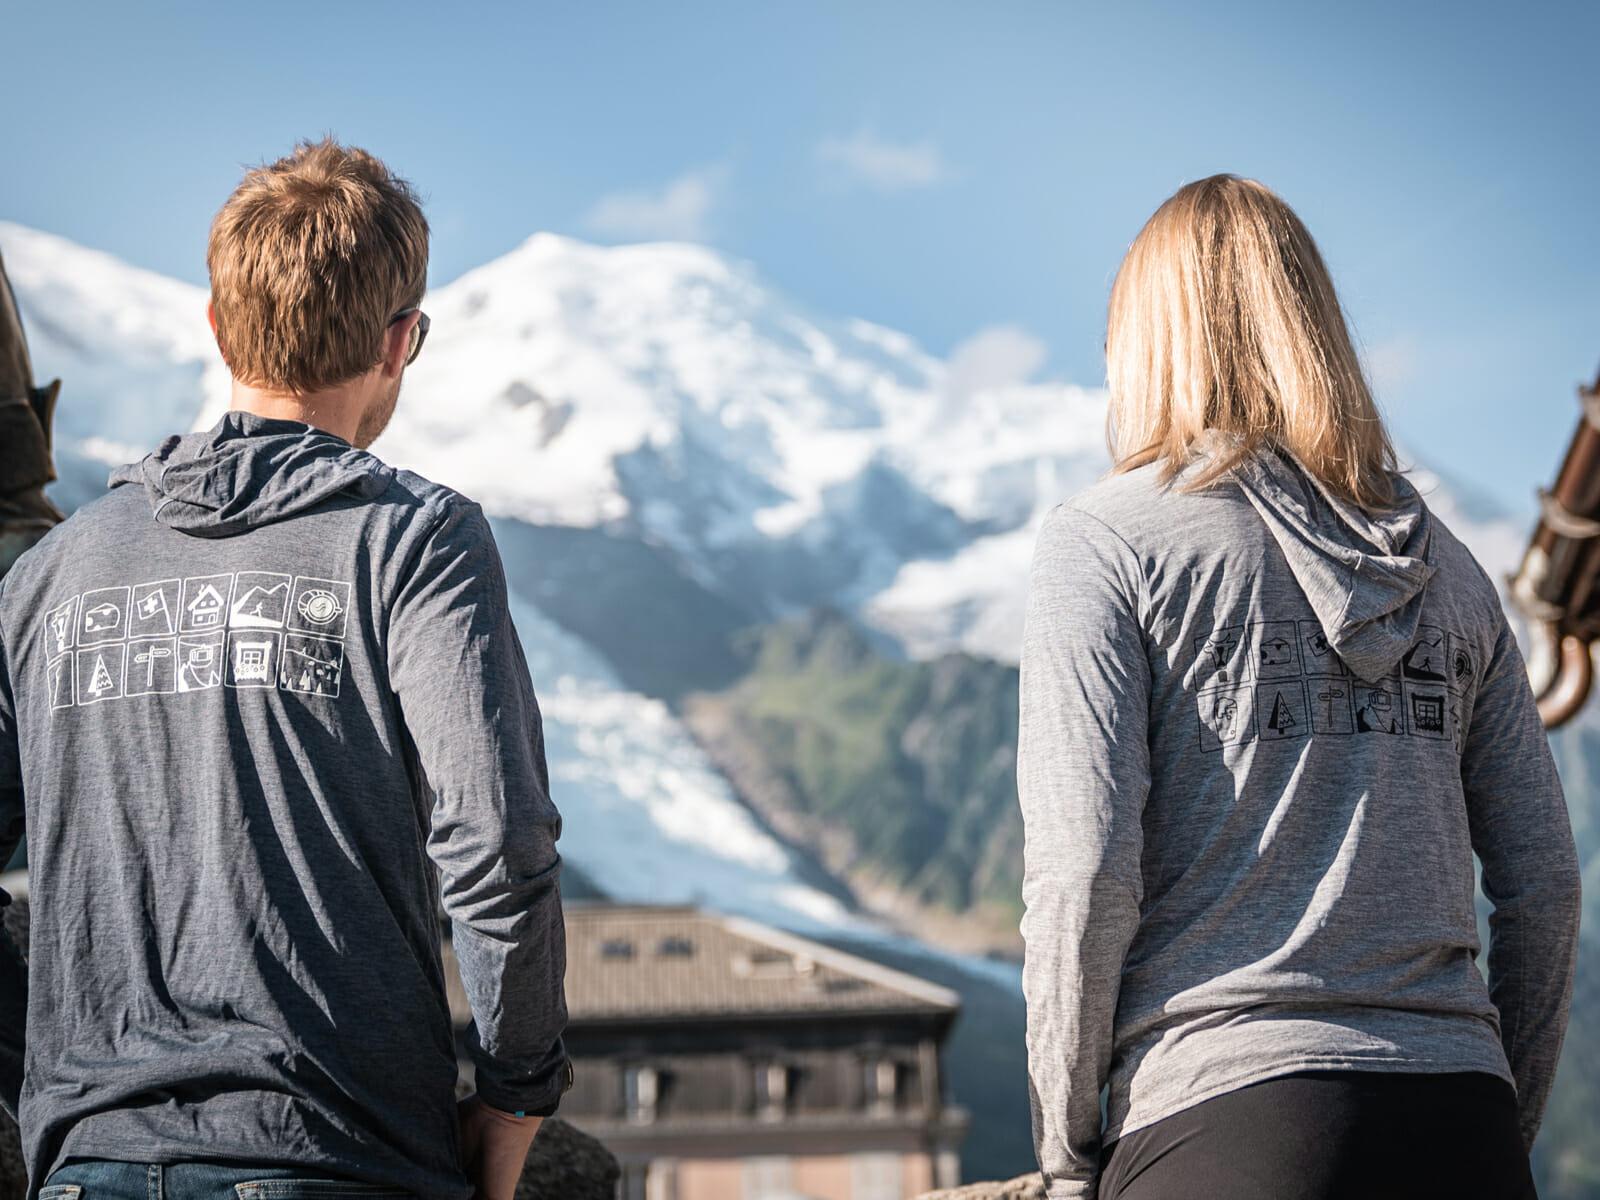 The back of Steph and Mike wearing grey Run the Alps hoodies, looking at the Mont Blanc